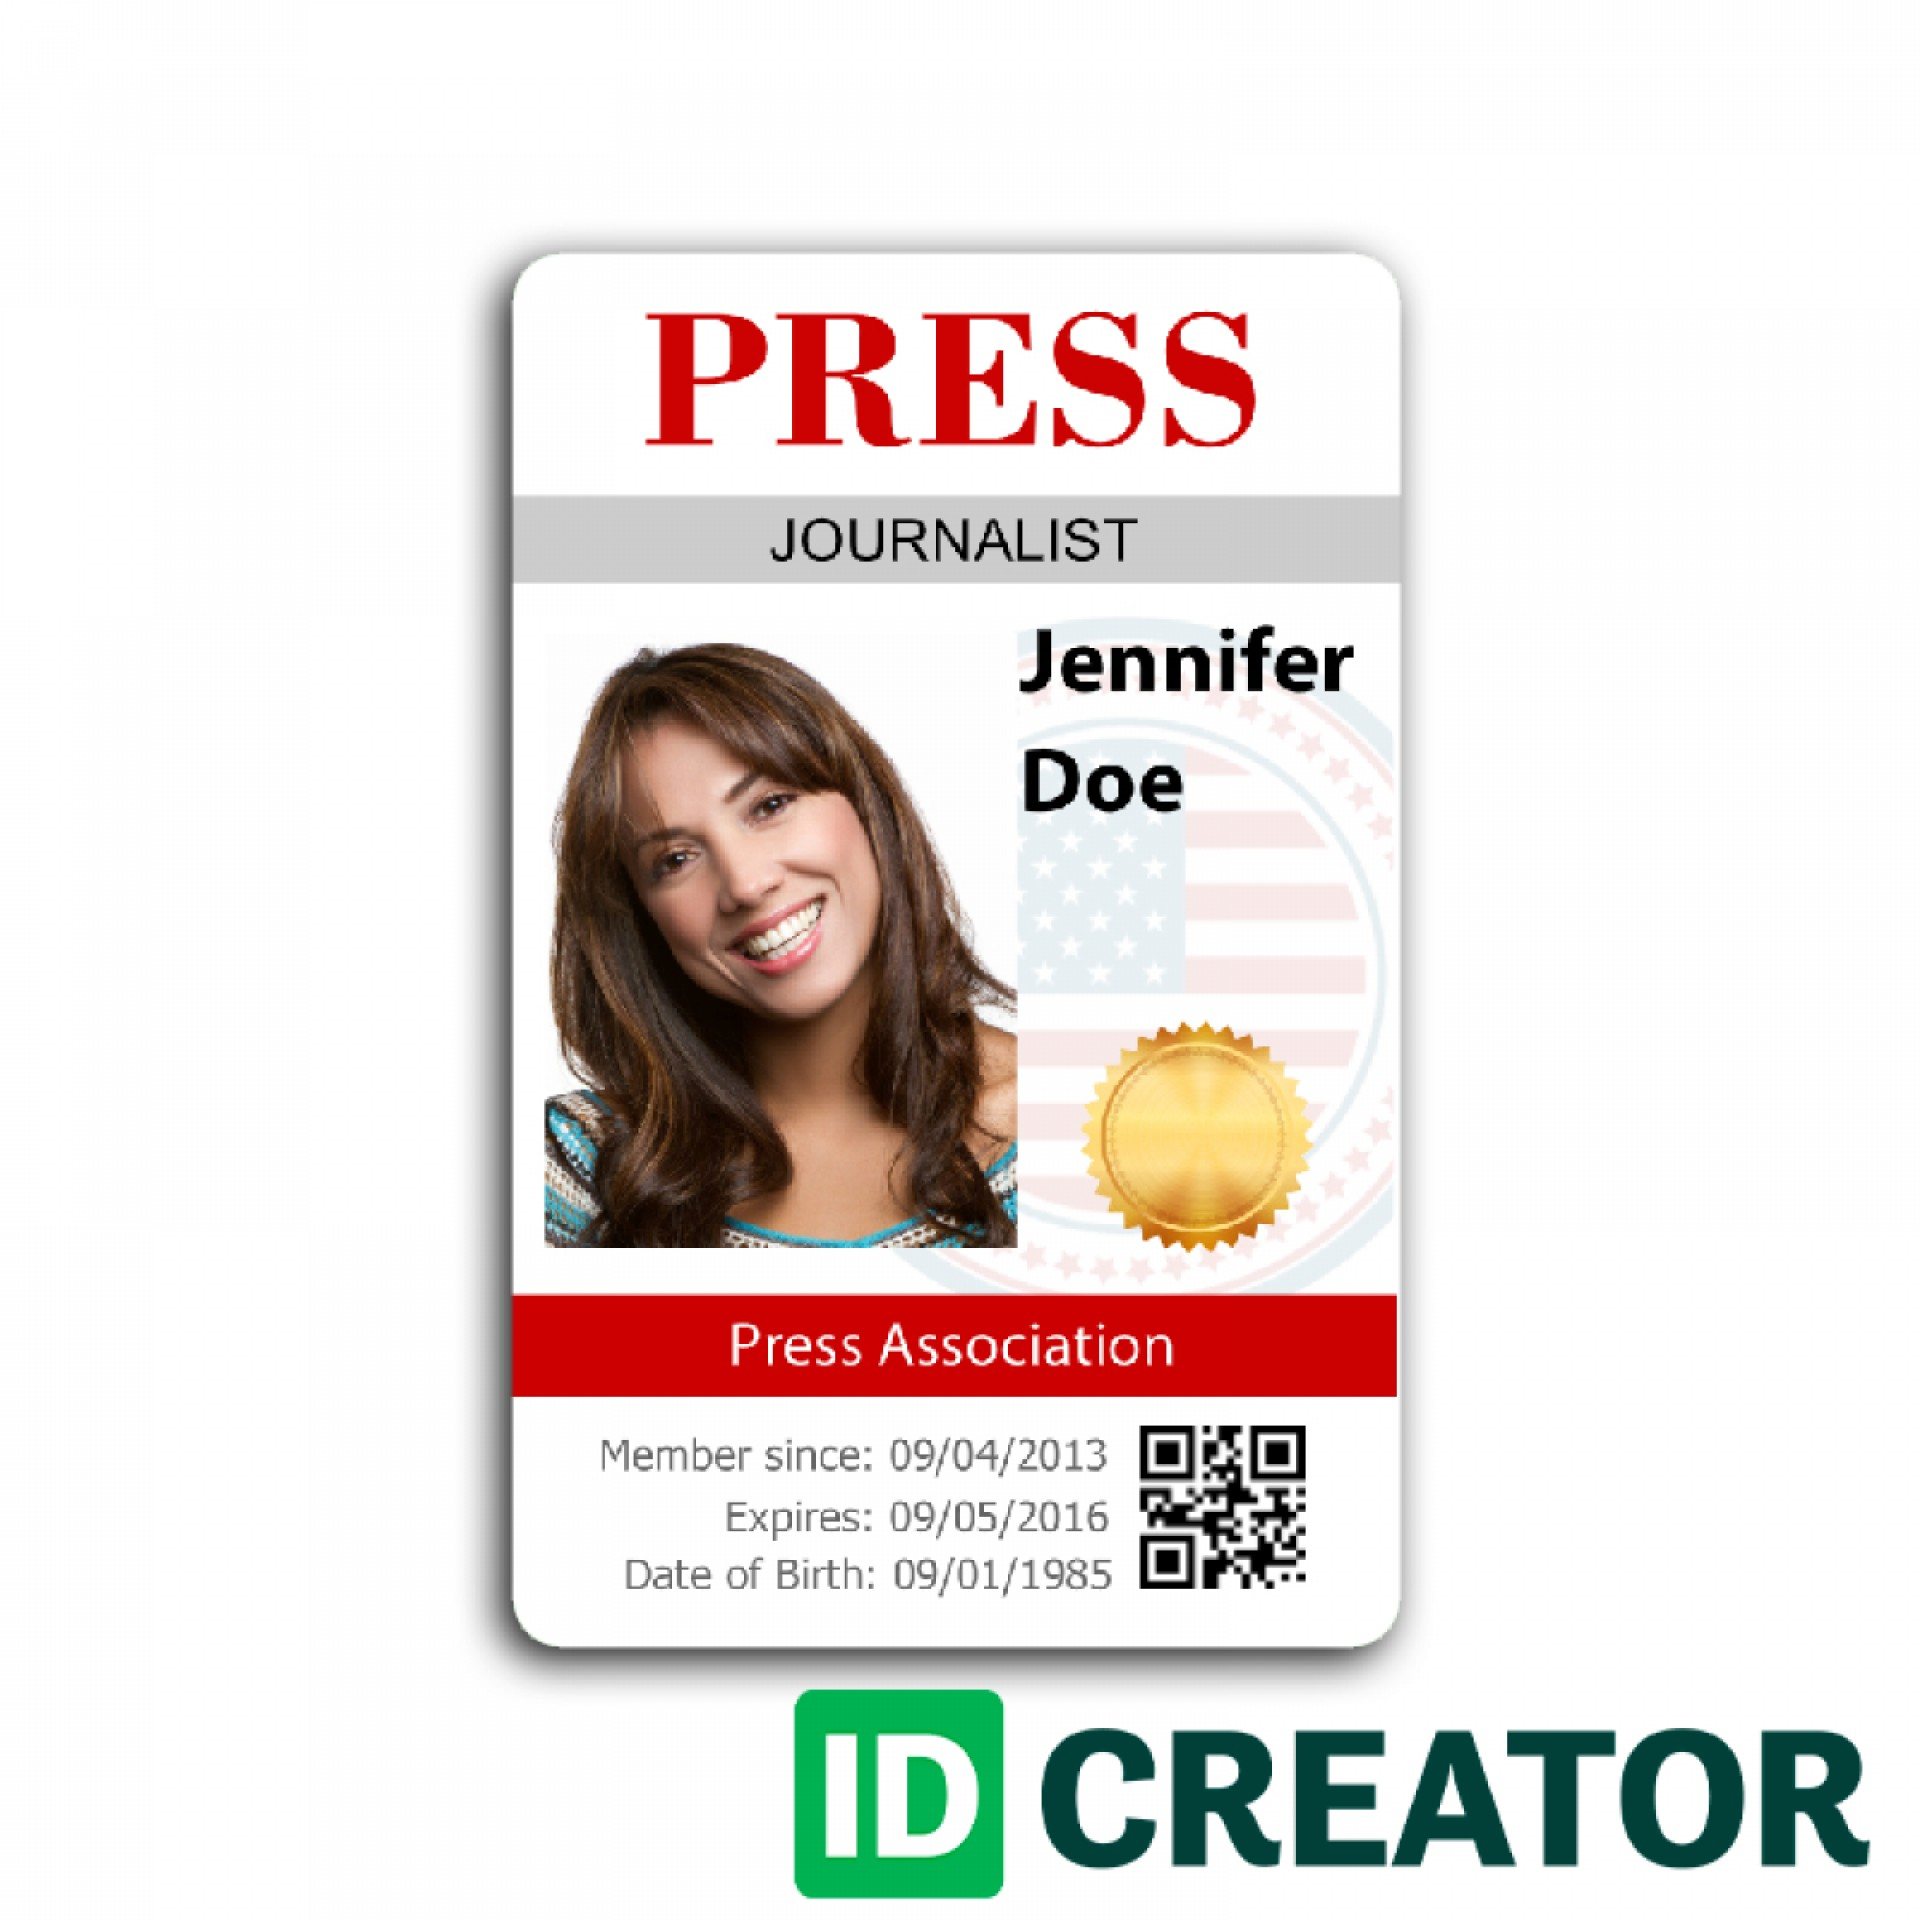 005 Free Id Badge Template Rare Ideas Employee Download Throughout Media Id Card Templates